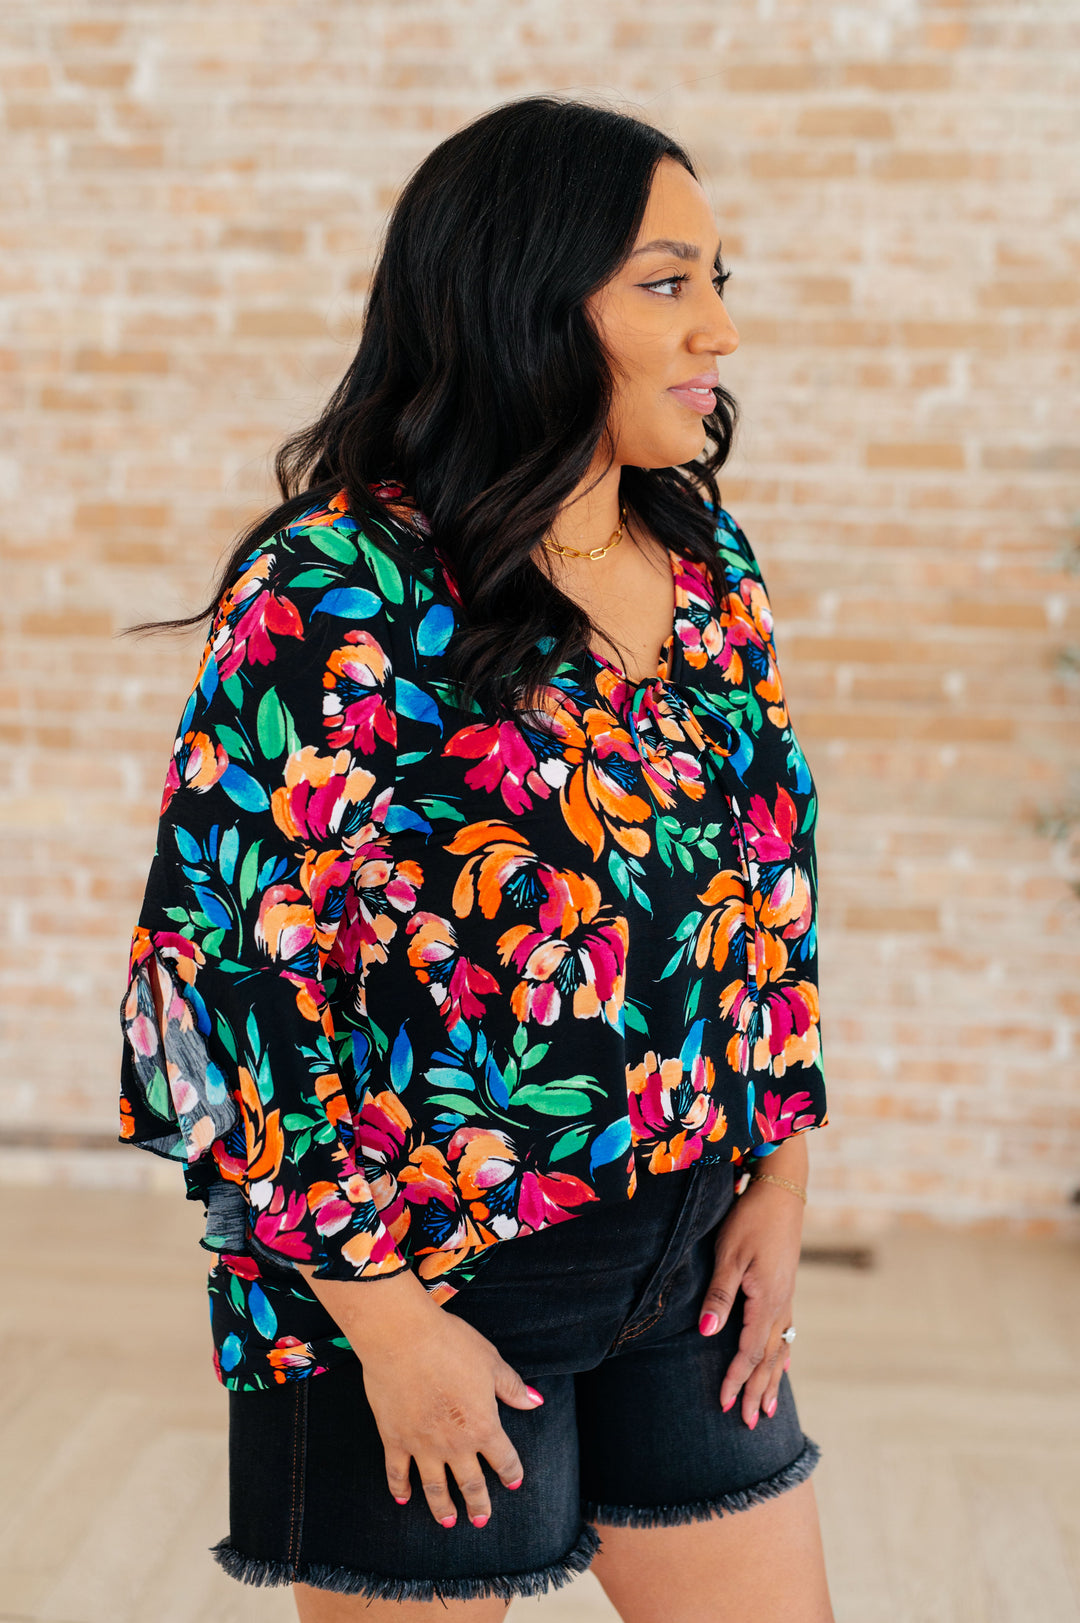 Bell-Sleeve Top in Black and Emerald Floral